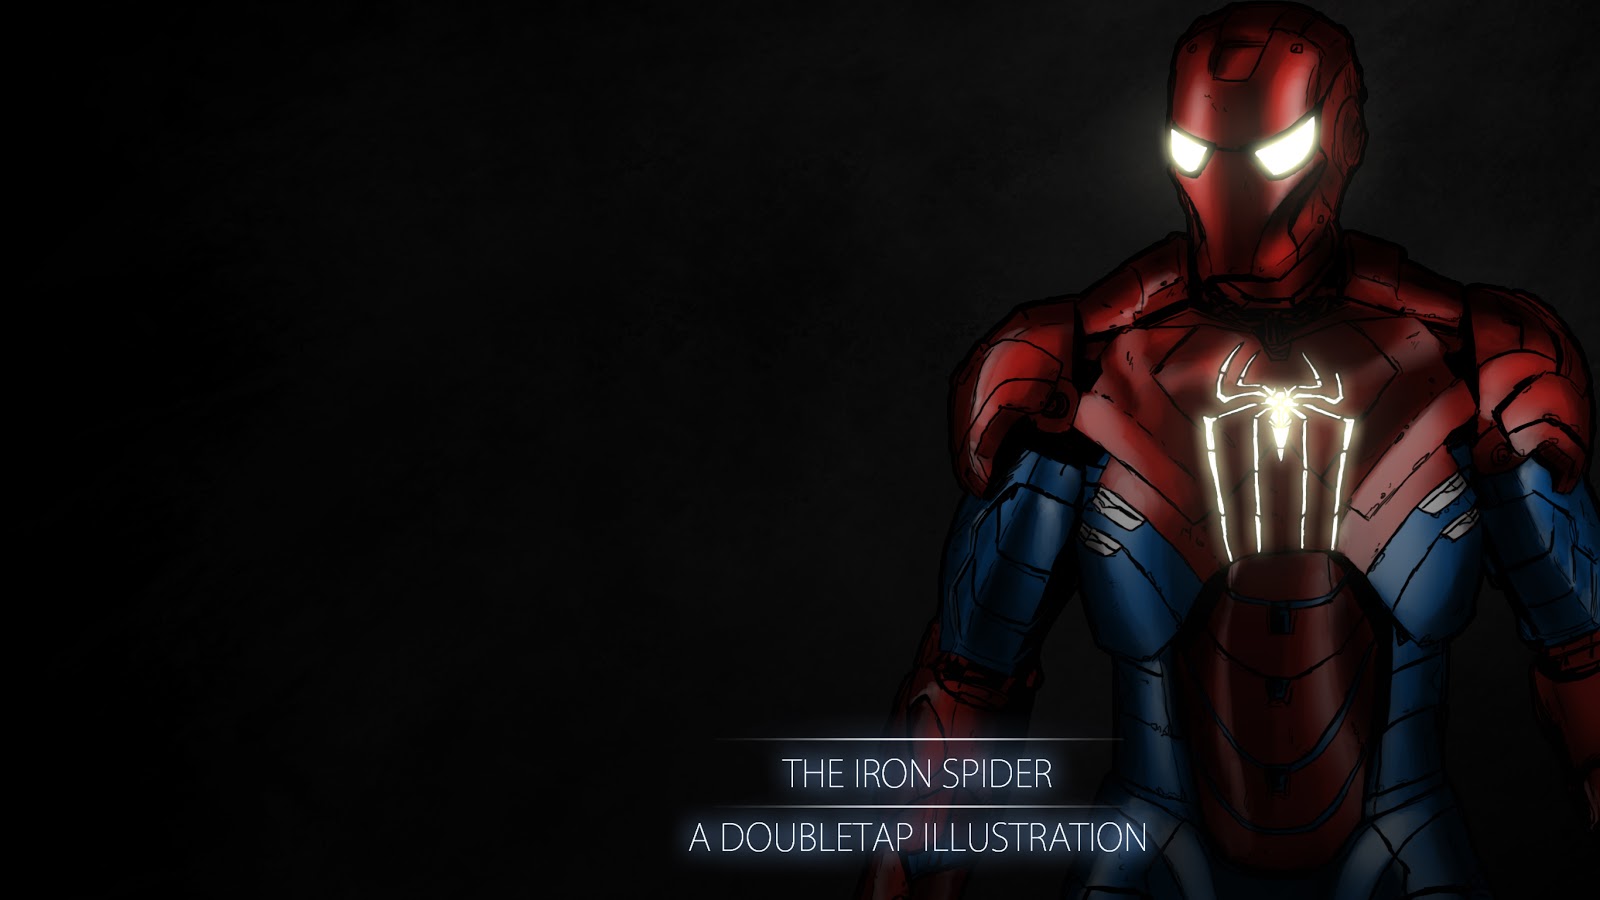 D Ublet Ps Artsy The Iron Spider